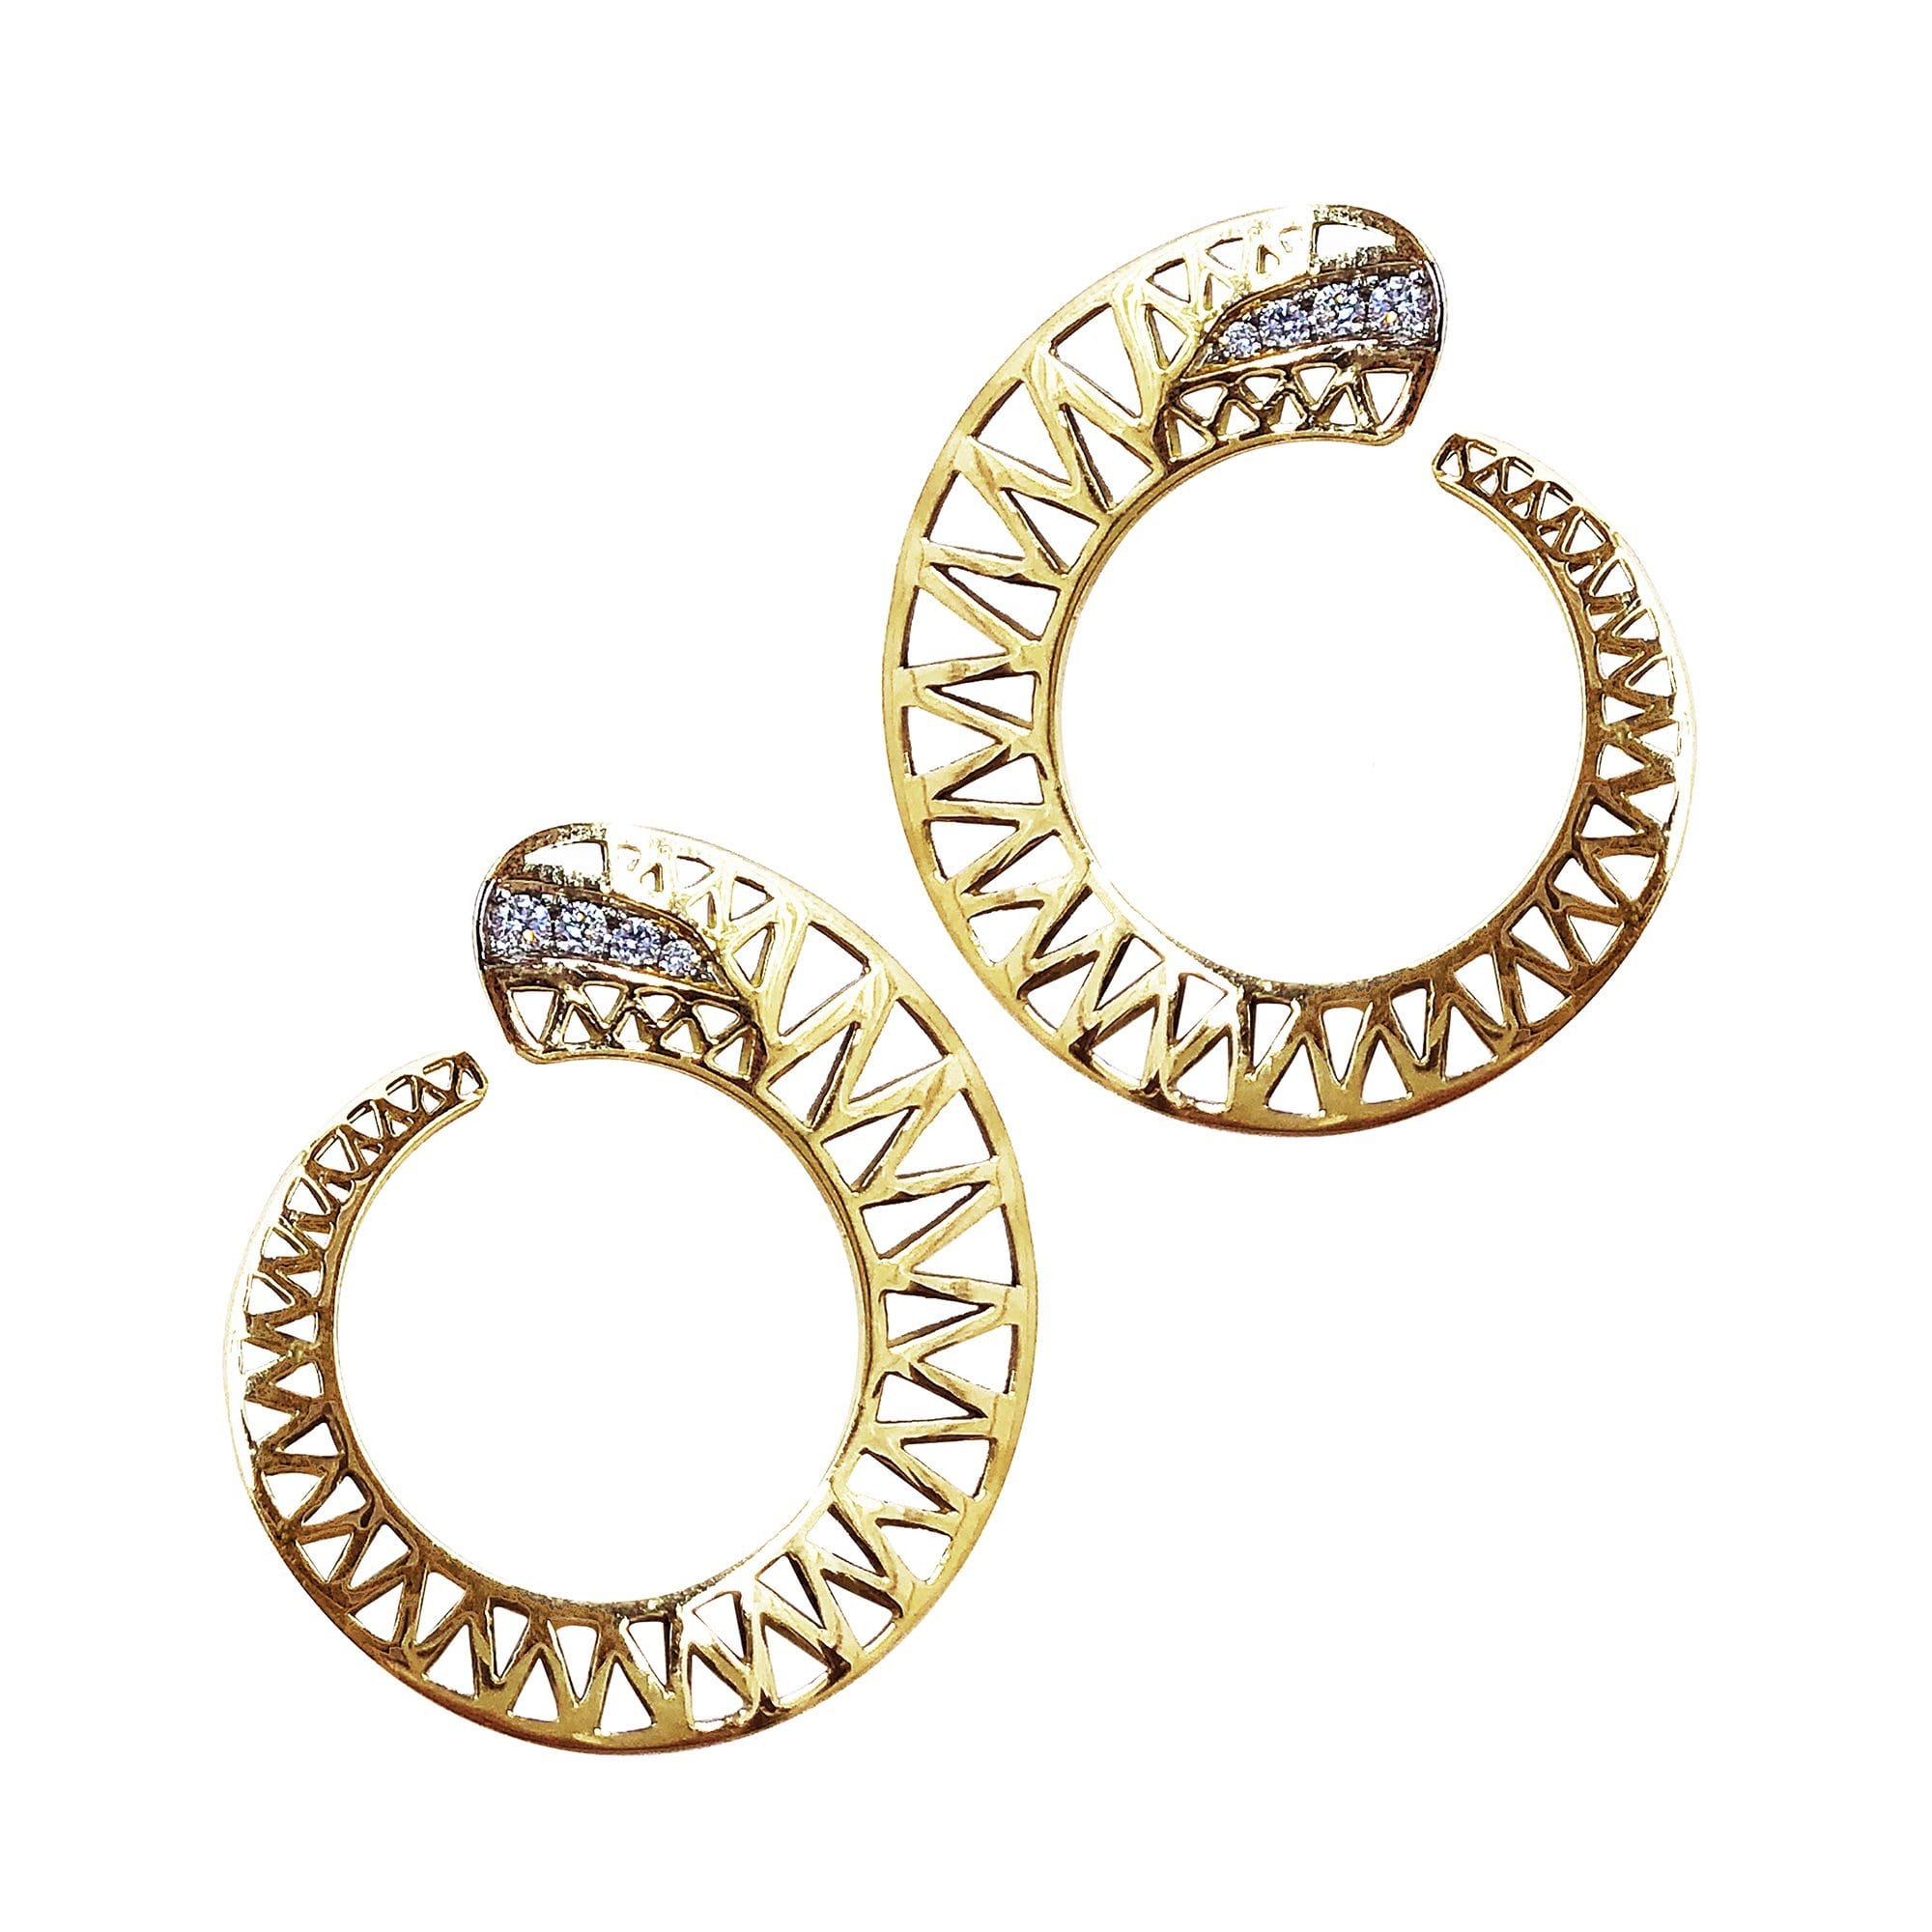 Vincents Fine Jewelry | Ray Griffiths | Spiral Pave Diamond Earrings